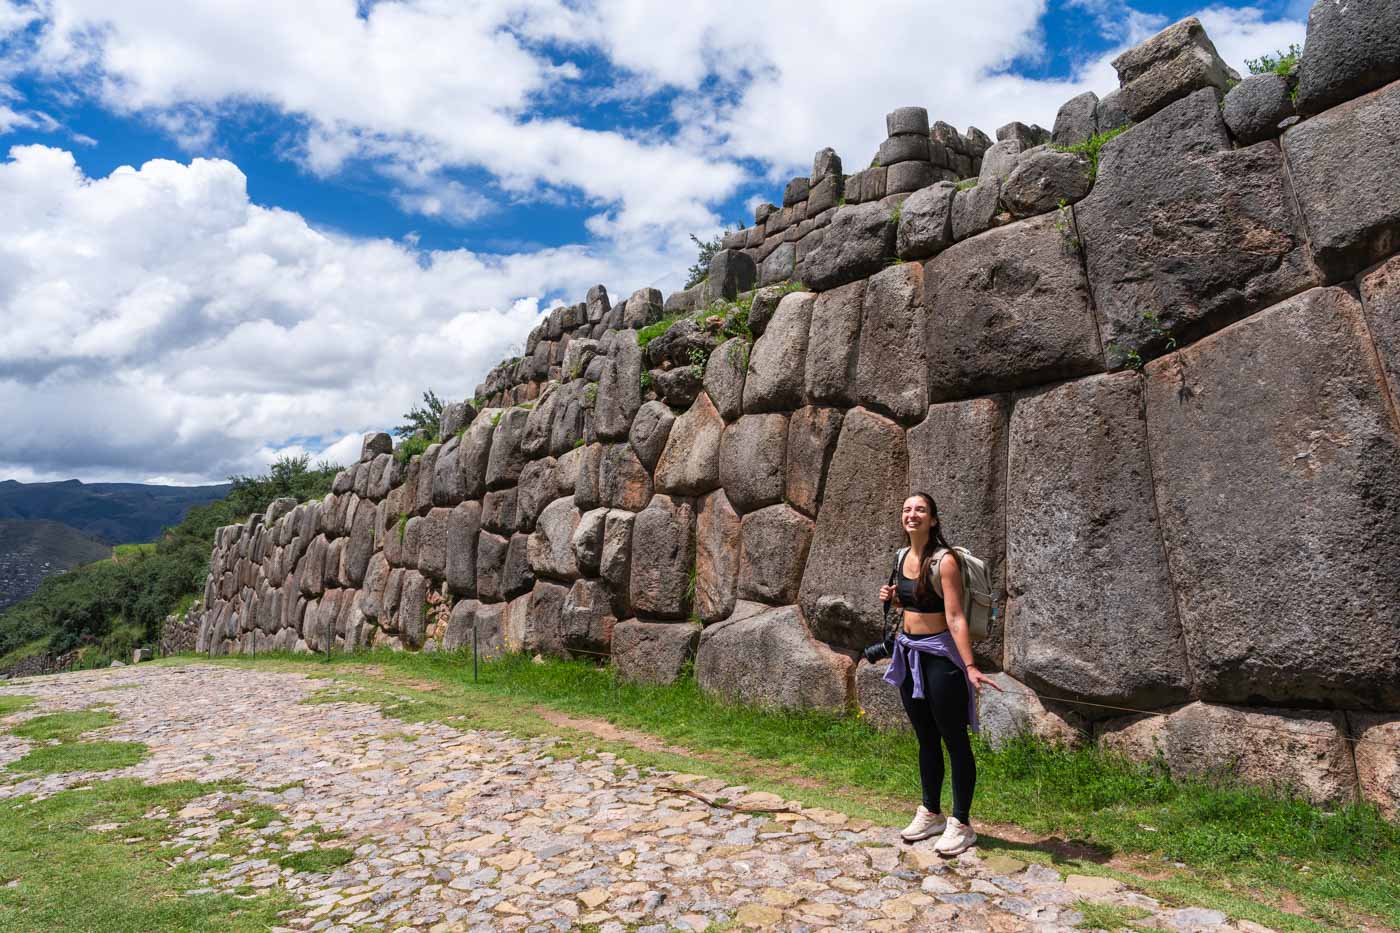 Sara wearing hiking gear and posing next to a giant Inca wall beside Saqsaywaman archeological site in Cusco.